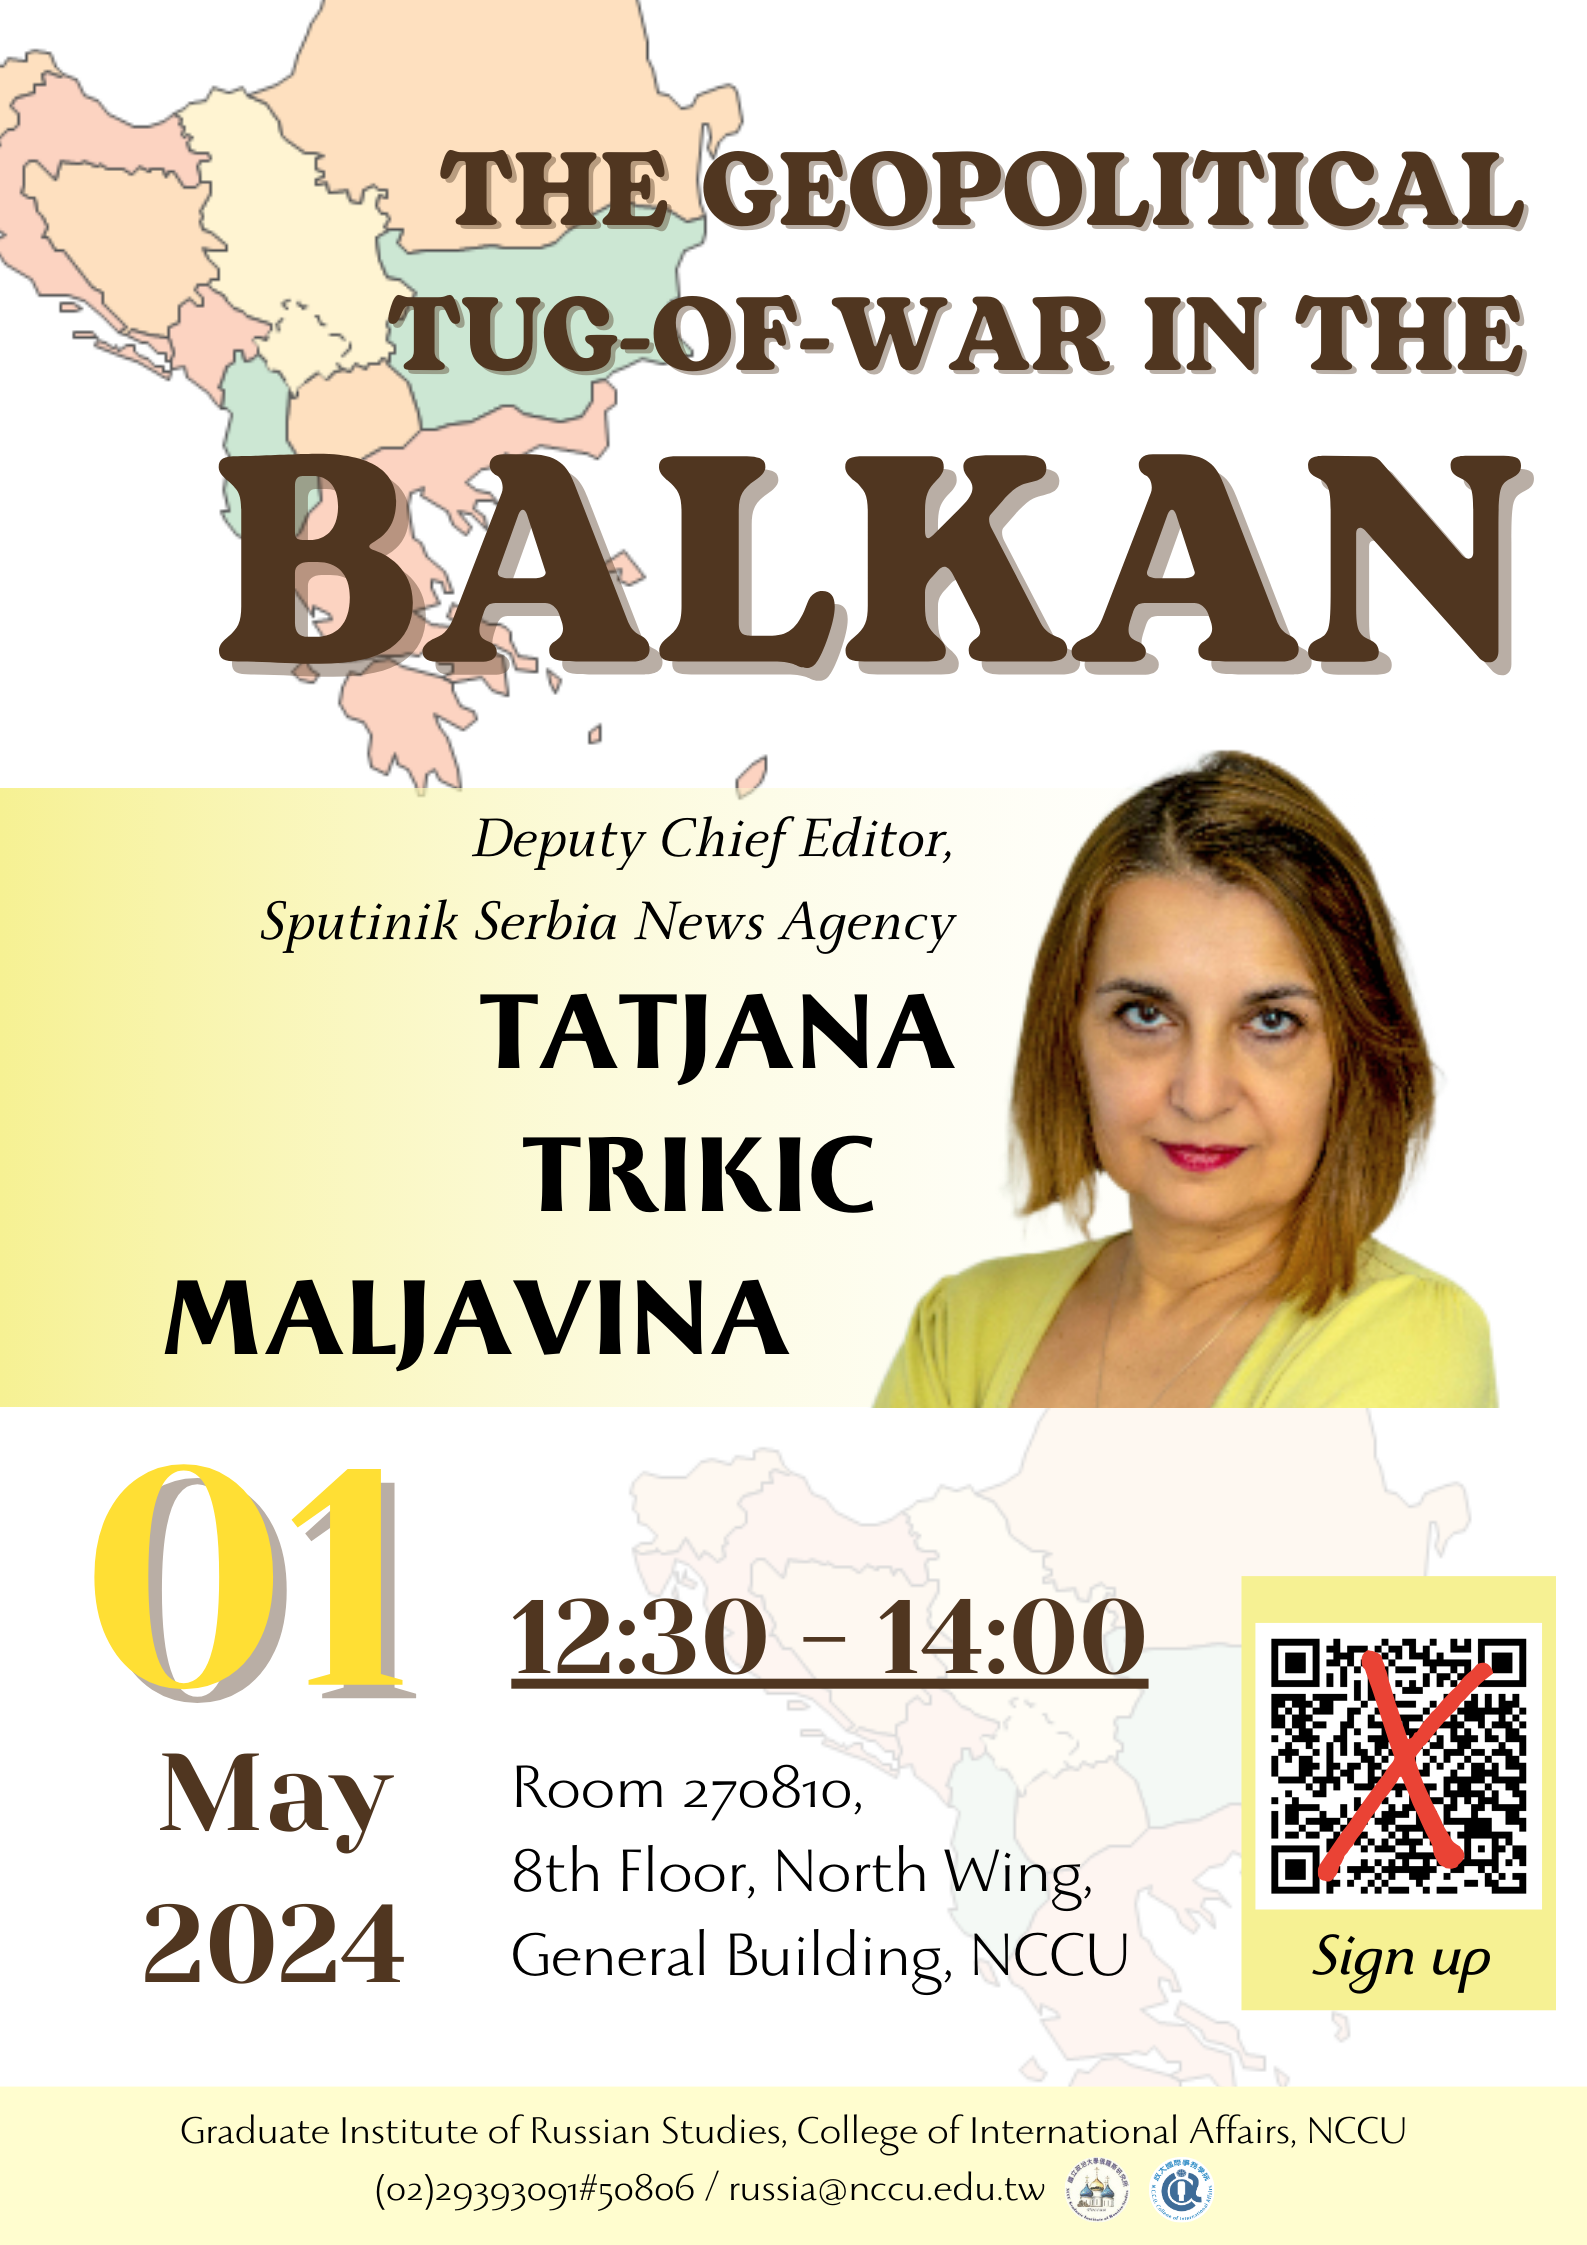 【Lecture】The Geopolitical Tug-of-War in the Balkan